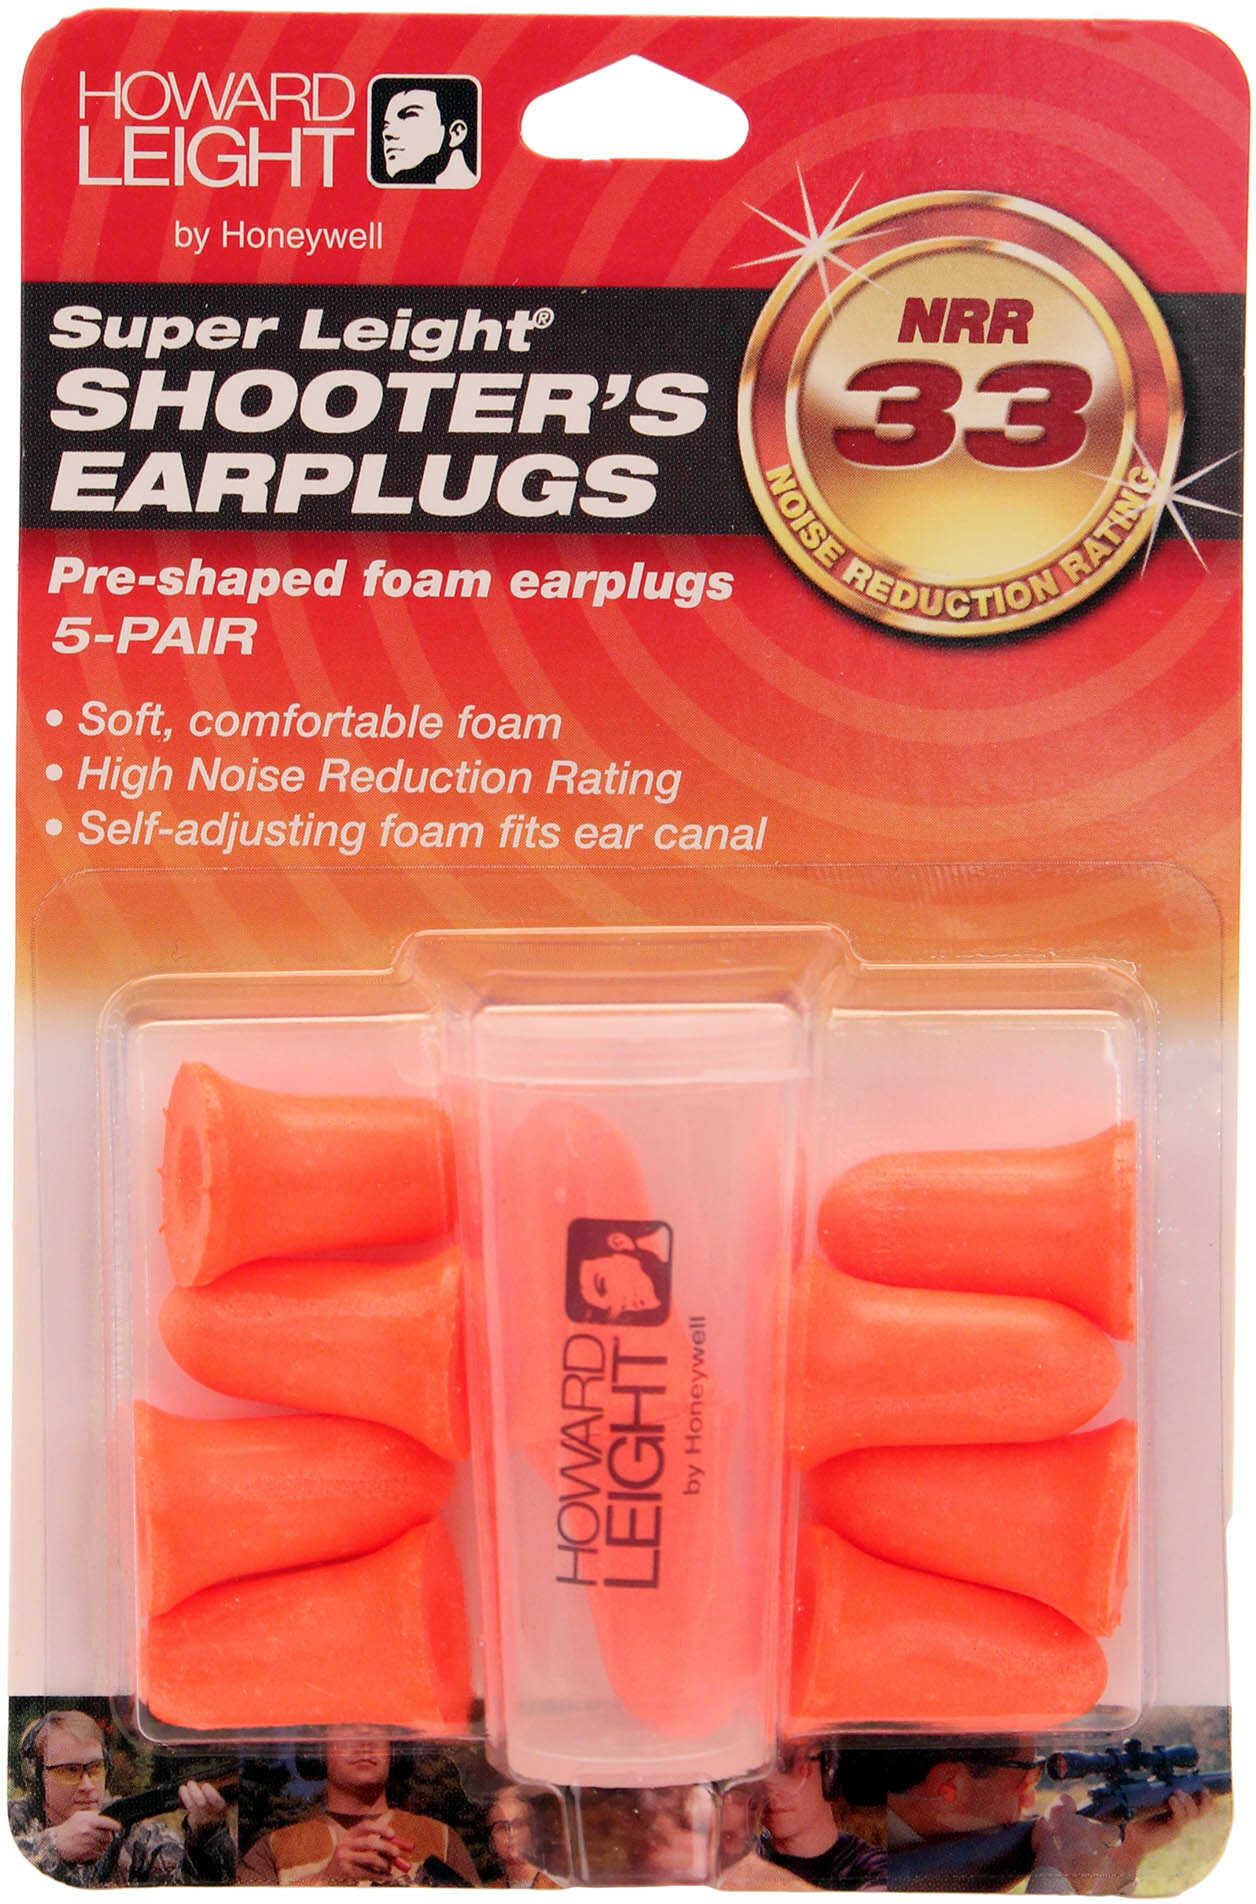 Howard Leight Industries Super Uncorded Disposable Earplugs NRR 33 - 5 pairs a blister pack with case Highest R-84133